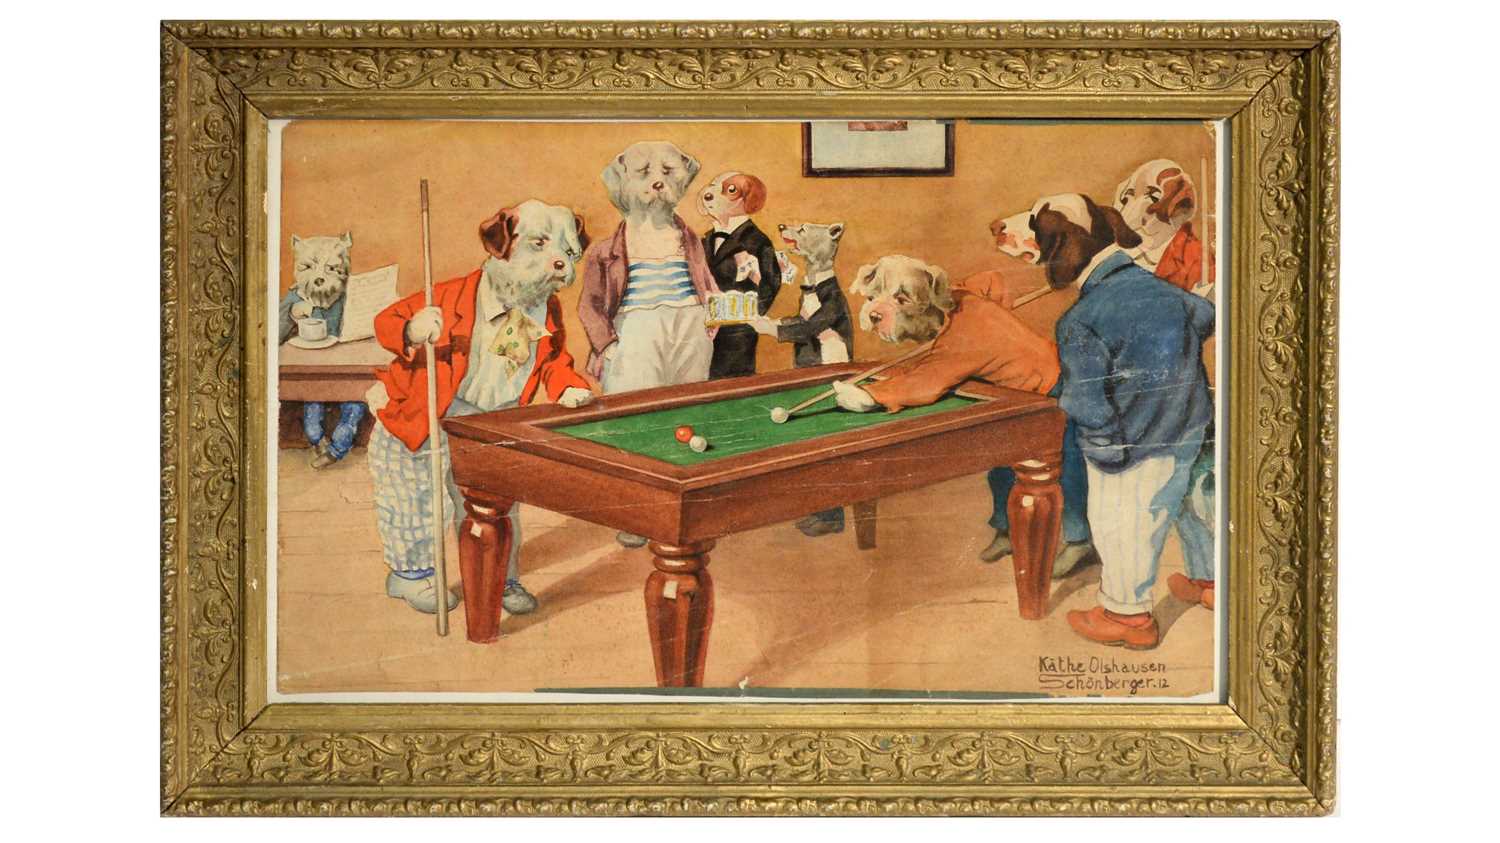 Lot 767 - Kathe Olshausen-Schönberger - Snooker with the Pack | watercolour